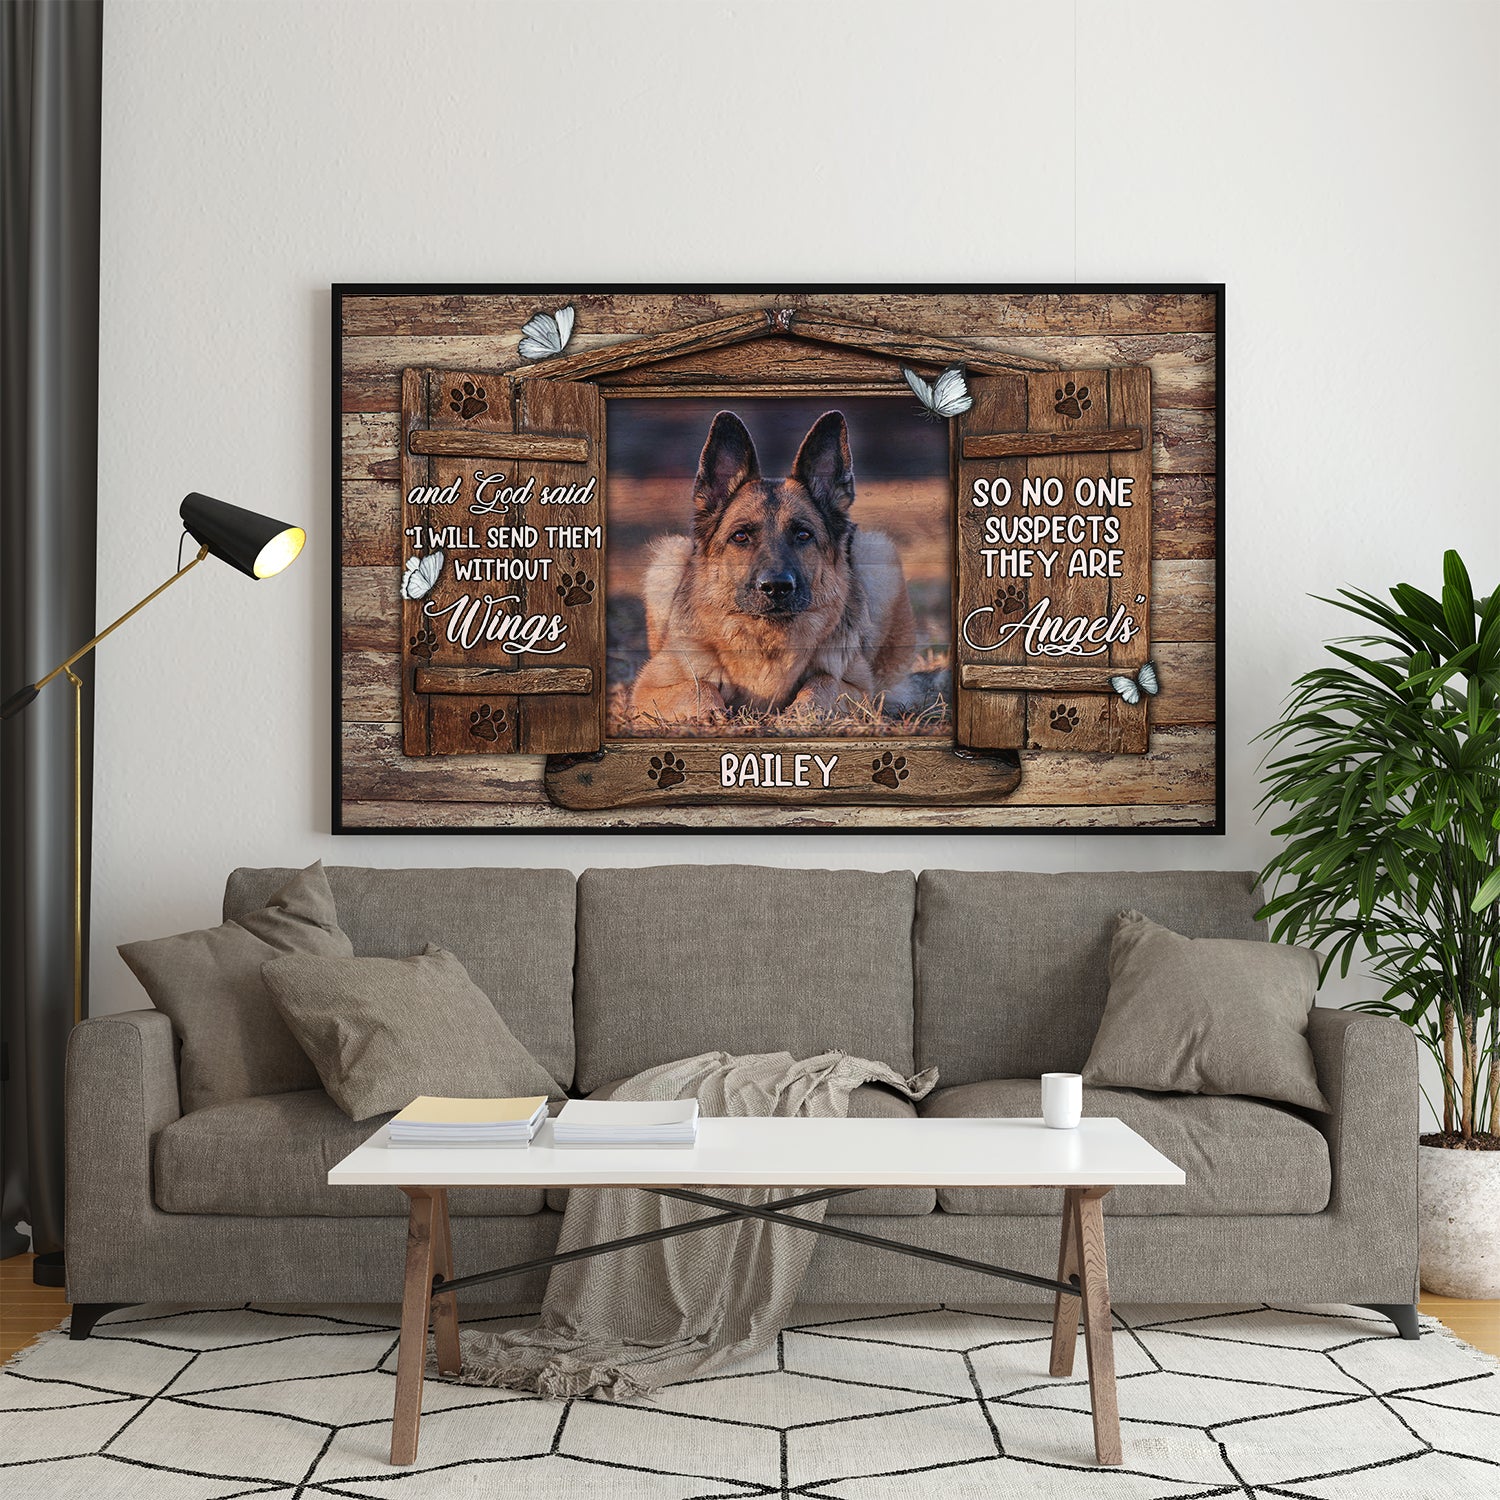 Personalized Custom Memorial Pet Photo Poster, And God Said, I Will Send Them Without Wings